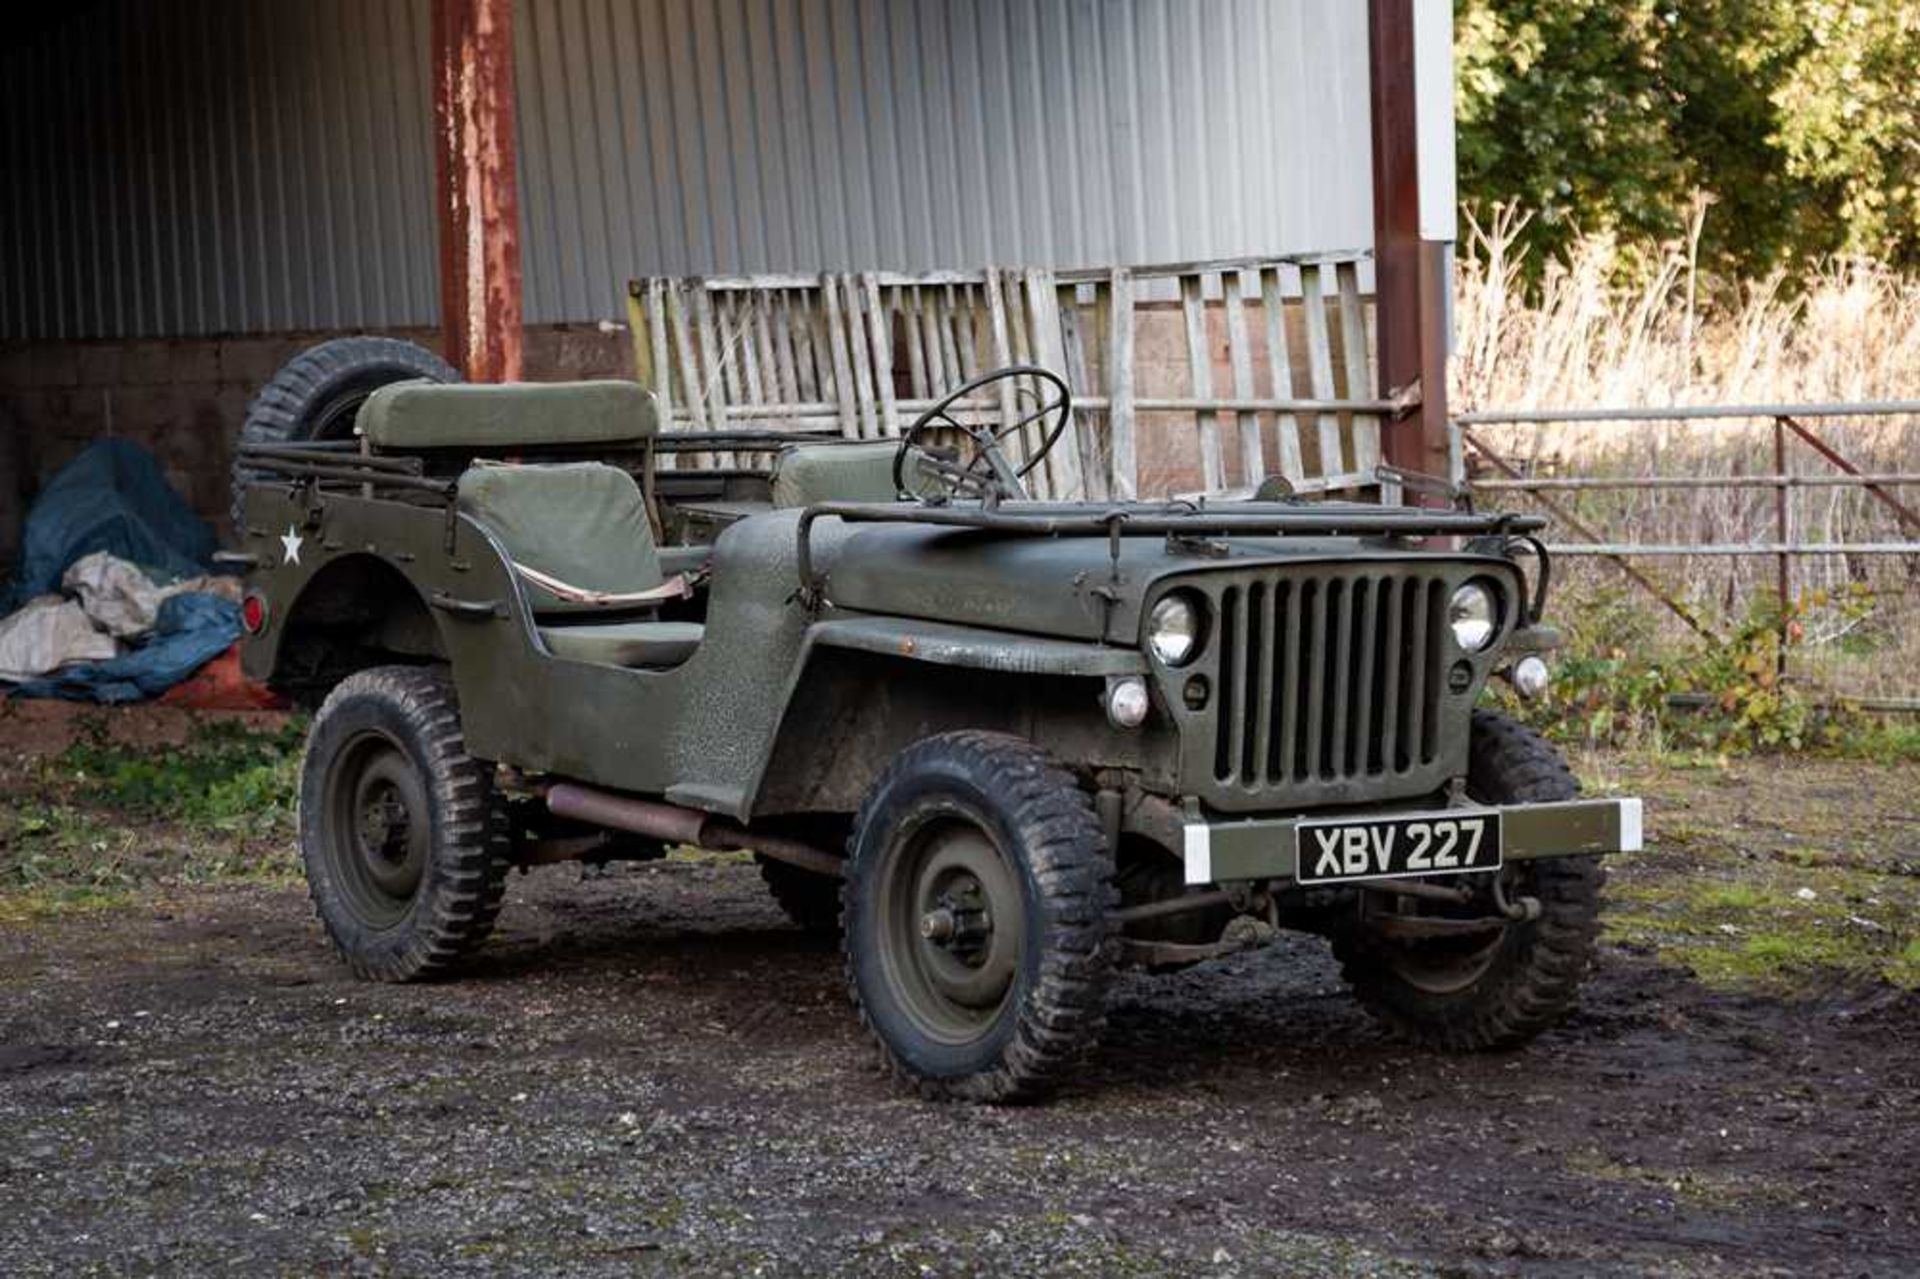 1943 Ford GPW Jeep Formerly the Property of Oscar Winner Rex Harrison - Image 63 of 88